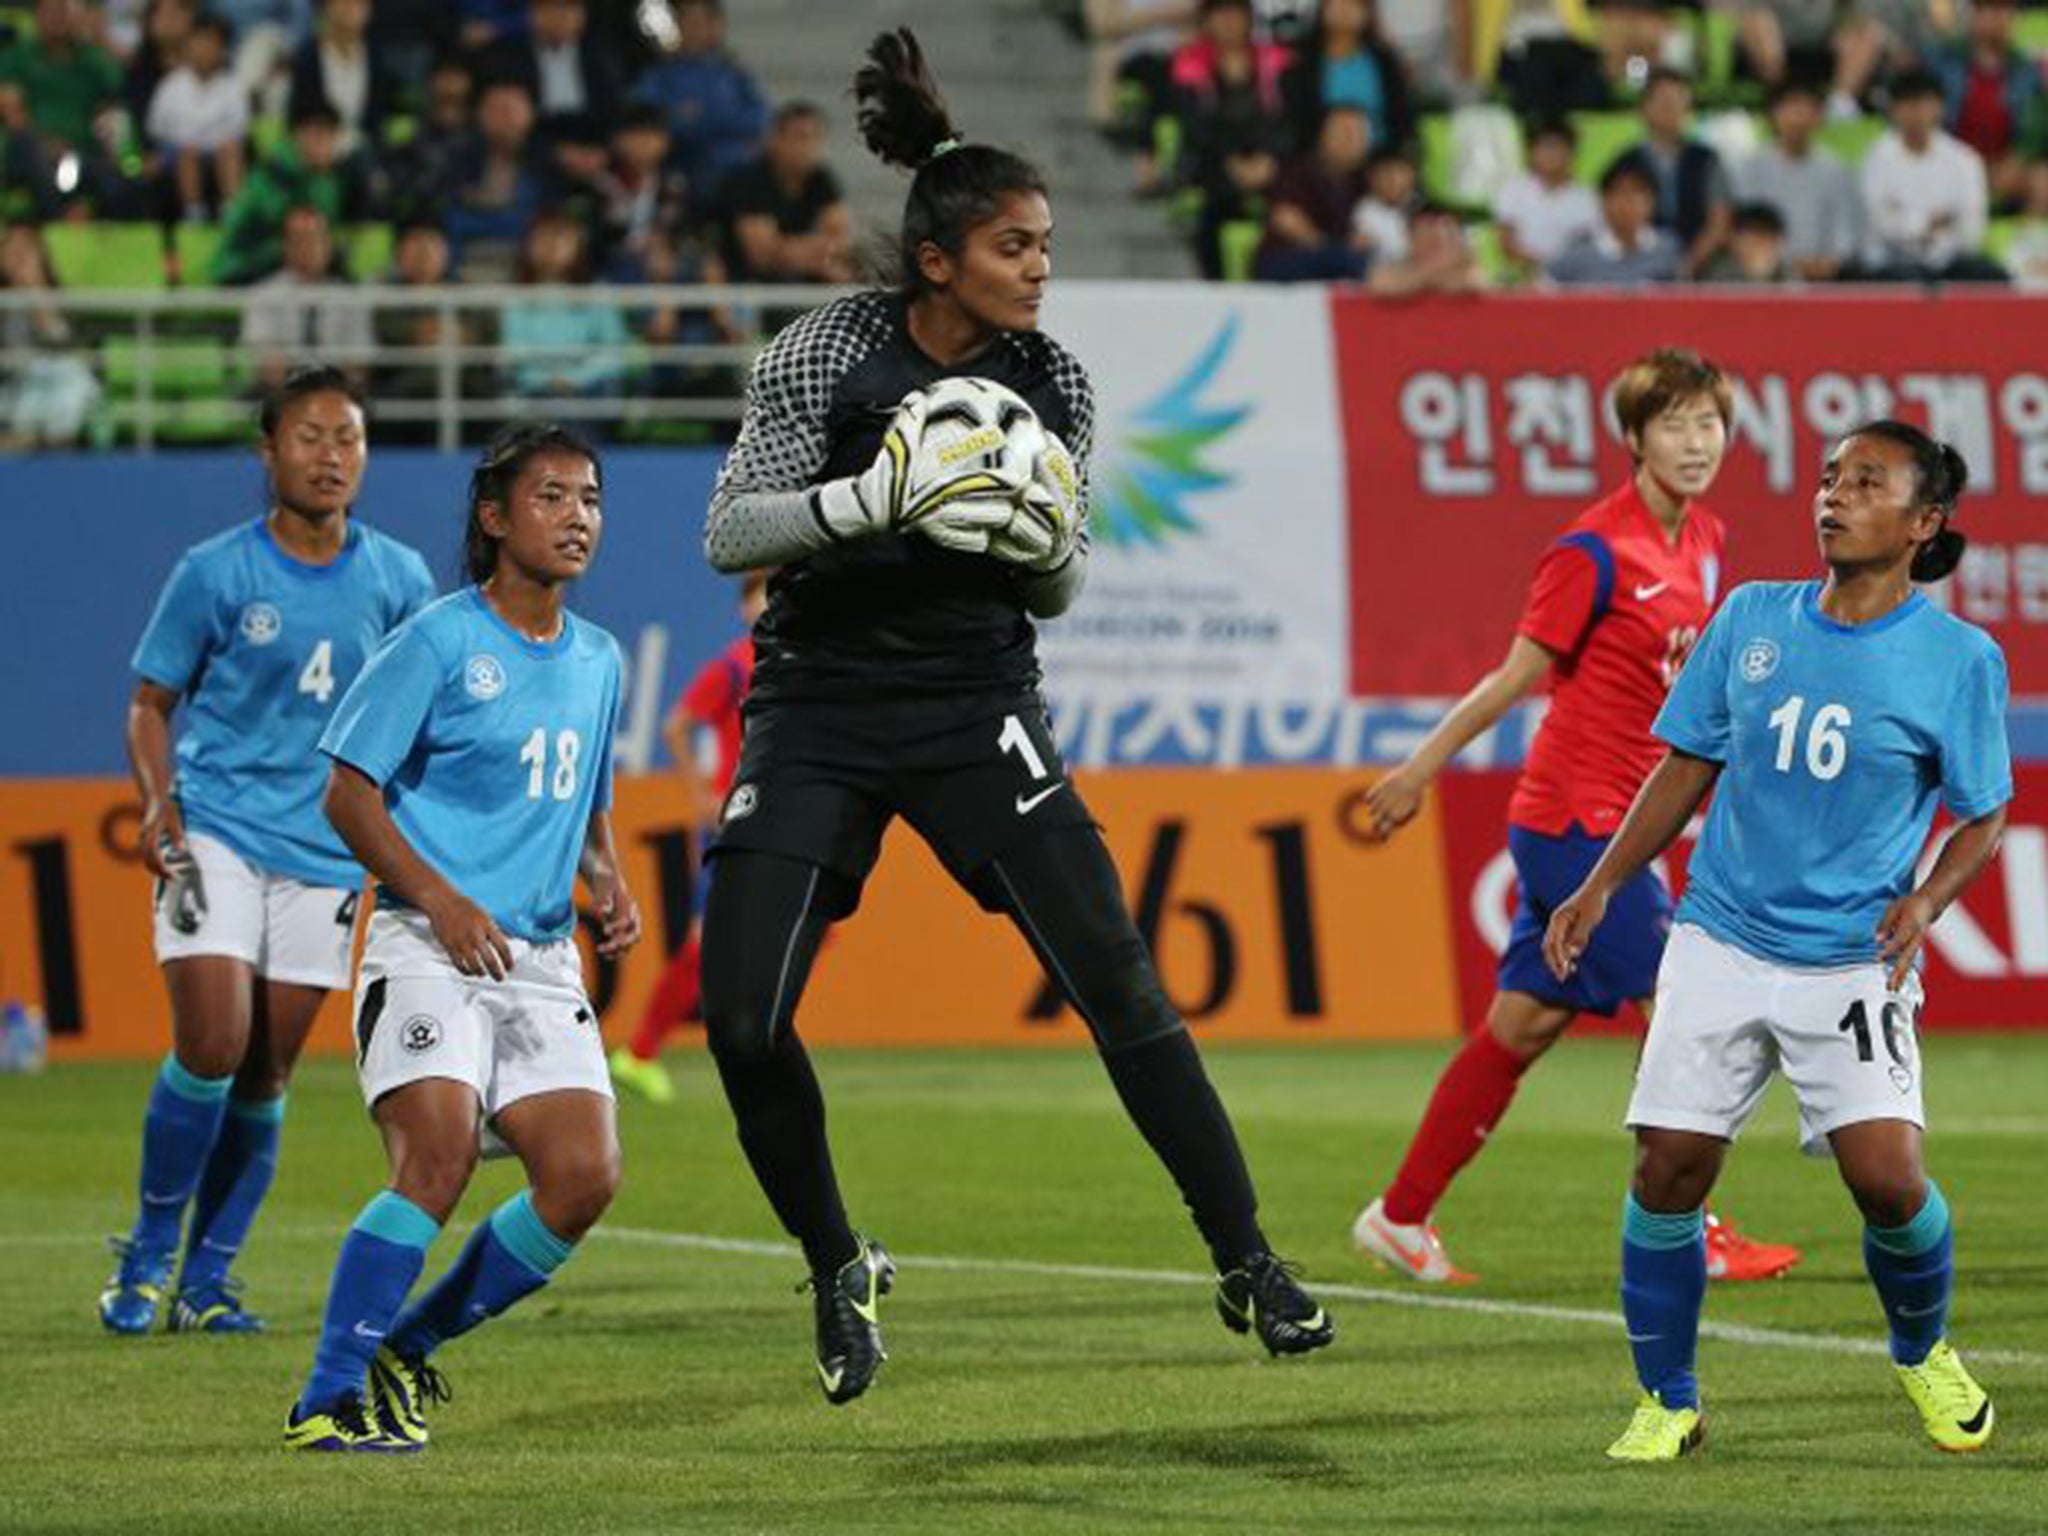 India goalkeeper Aditi Chauhan became the country's first woman to play English league football